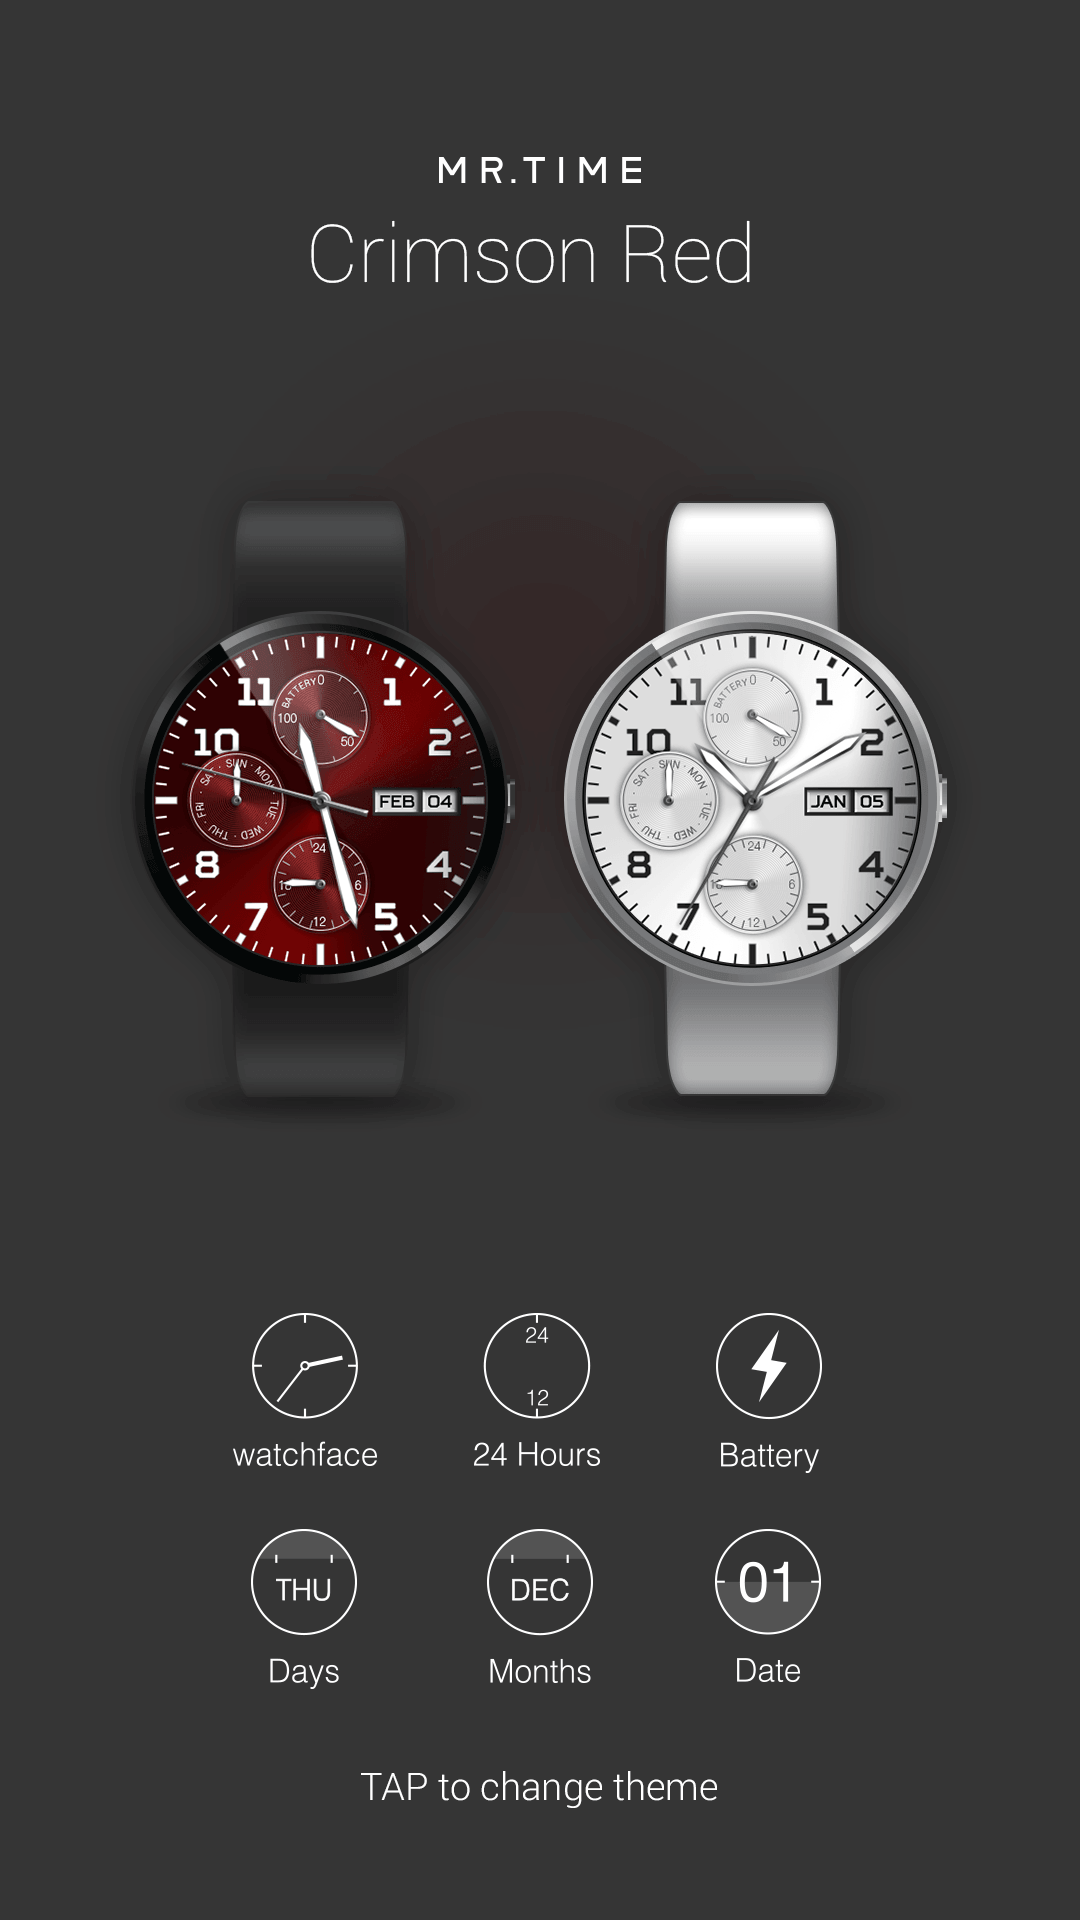 Android application Mr.Time : Crimson Red screenshort